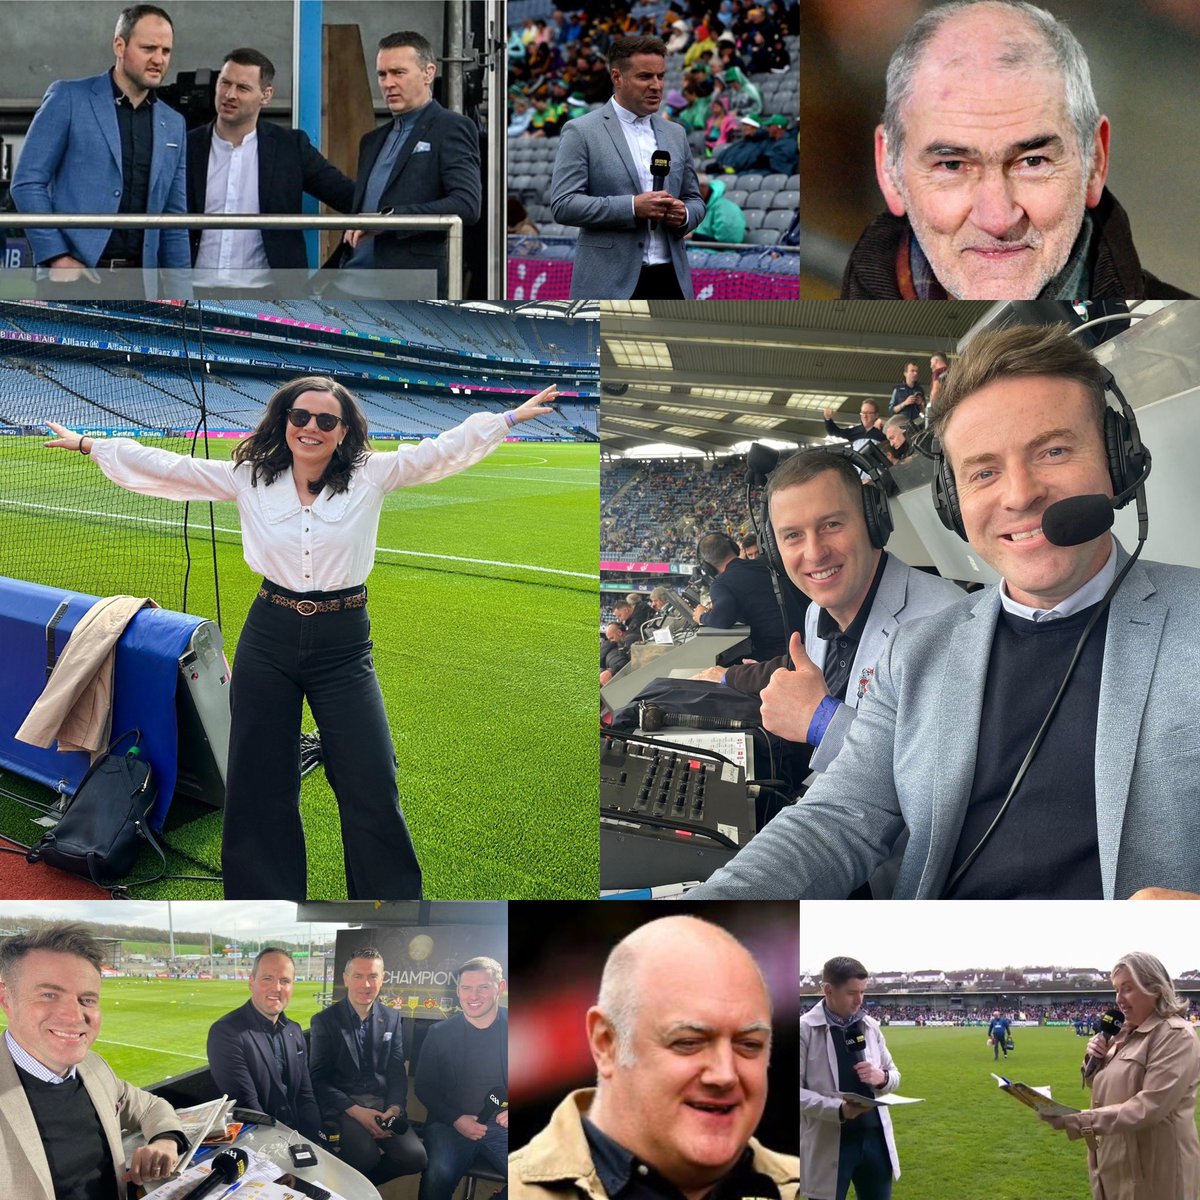 The BBC All-Ireland football final coverage is into the final 3 for the prestigious RTS Award. It’s the biggest award in broadcasting. Rugby World Cup on ITV & Ashes coverage on Sky are the other two shortlisted. Real team effort. Fabulous to see this recognition